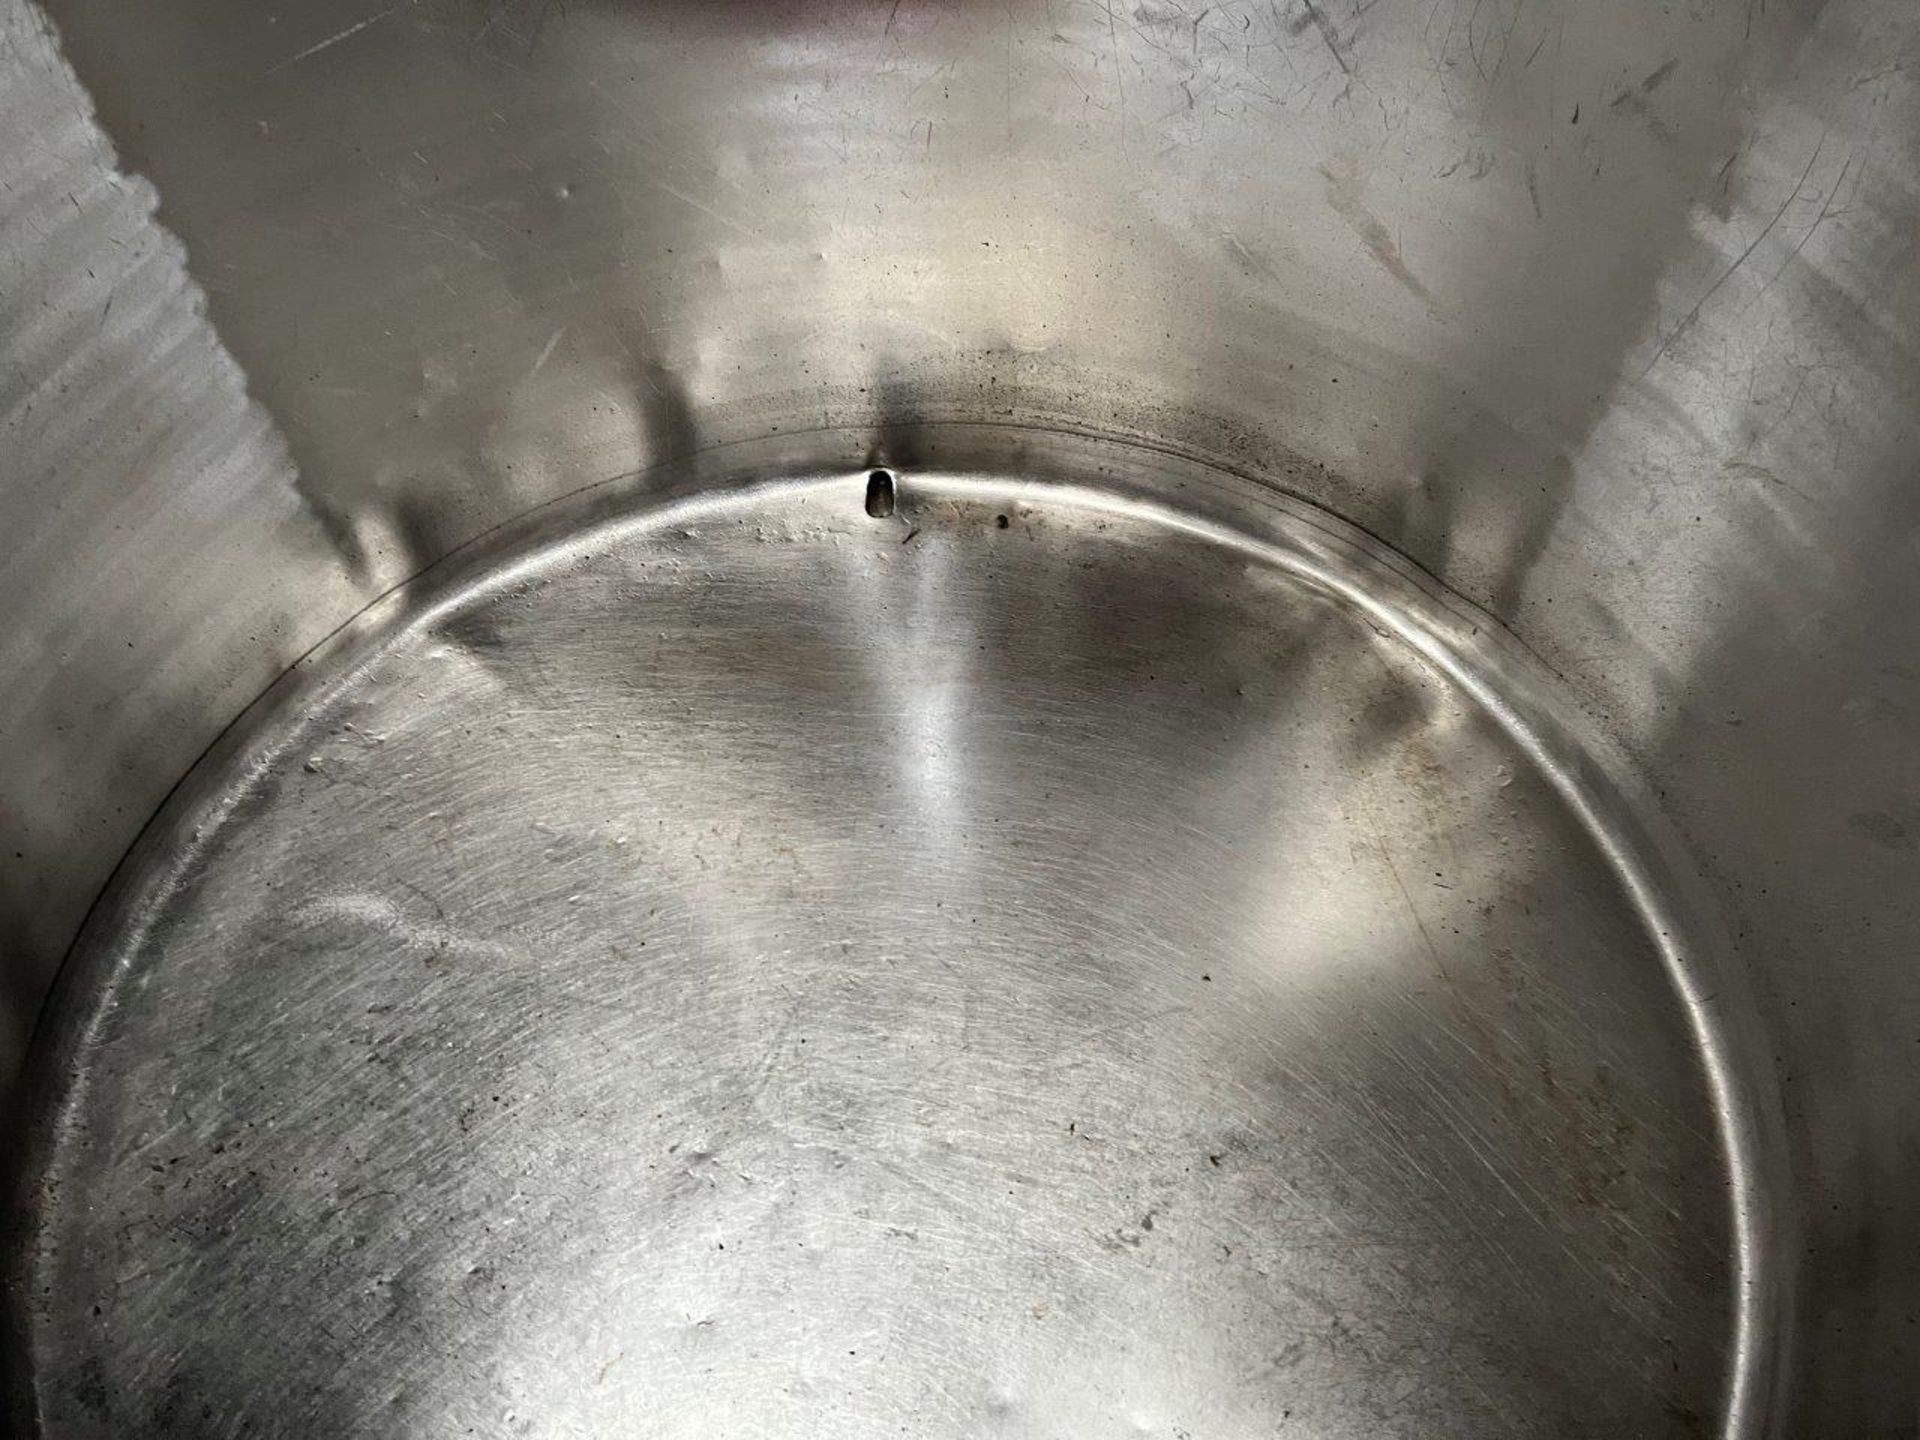 Stainless steel mixing vessel - Image 2 of 3